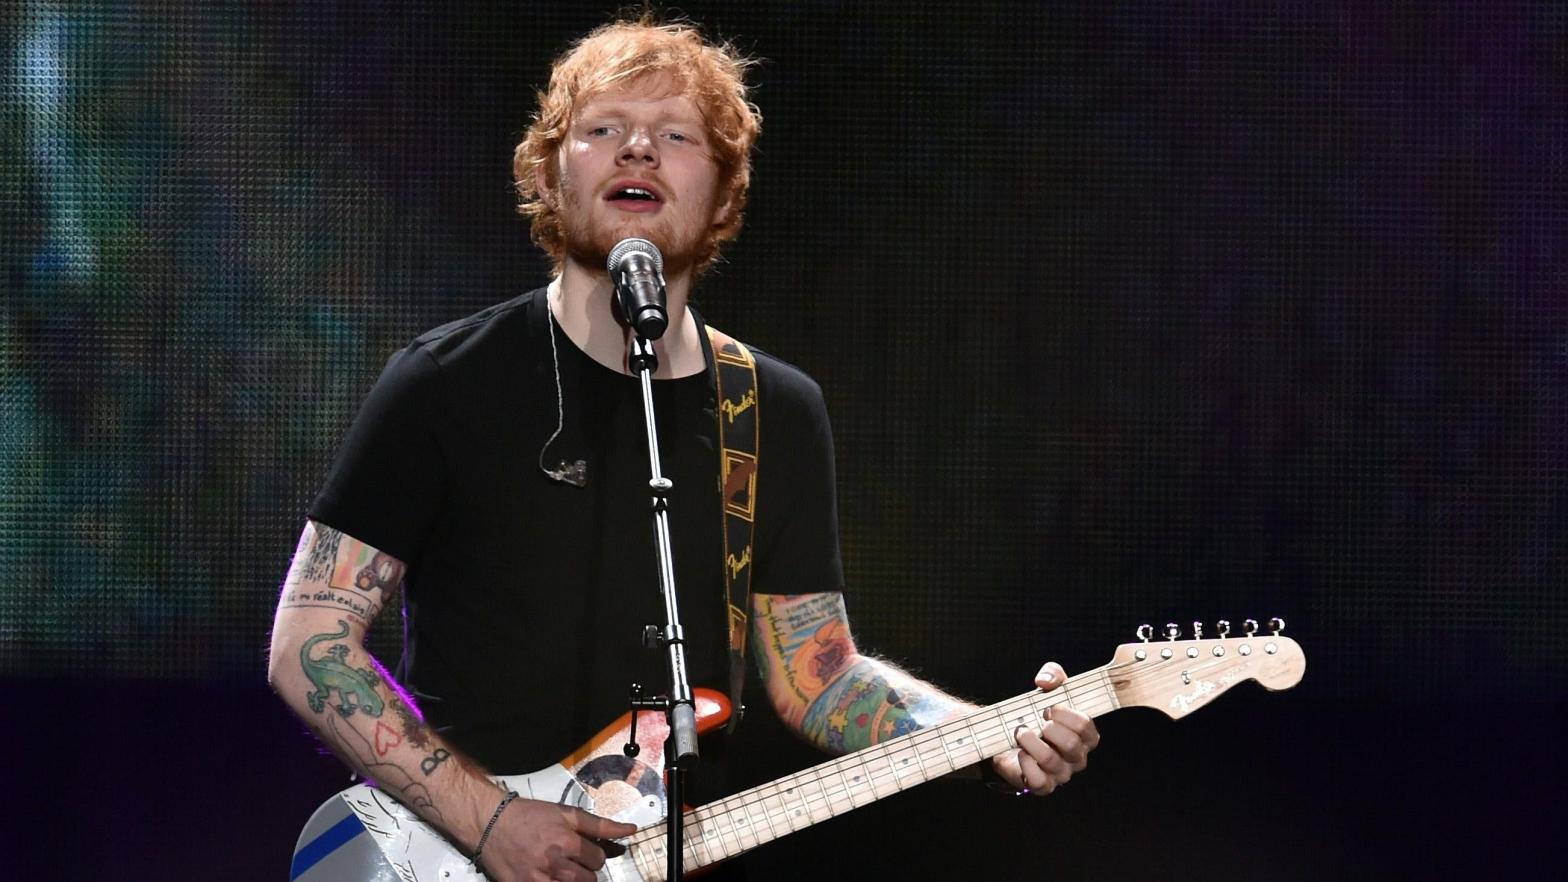 Ed Sheeran was one of the over 80 identified artists that fell prey to Adrian Kwiatkowski's 2019 hack. (Image: Kevin Winter, Getty Images)